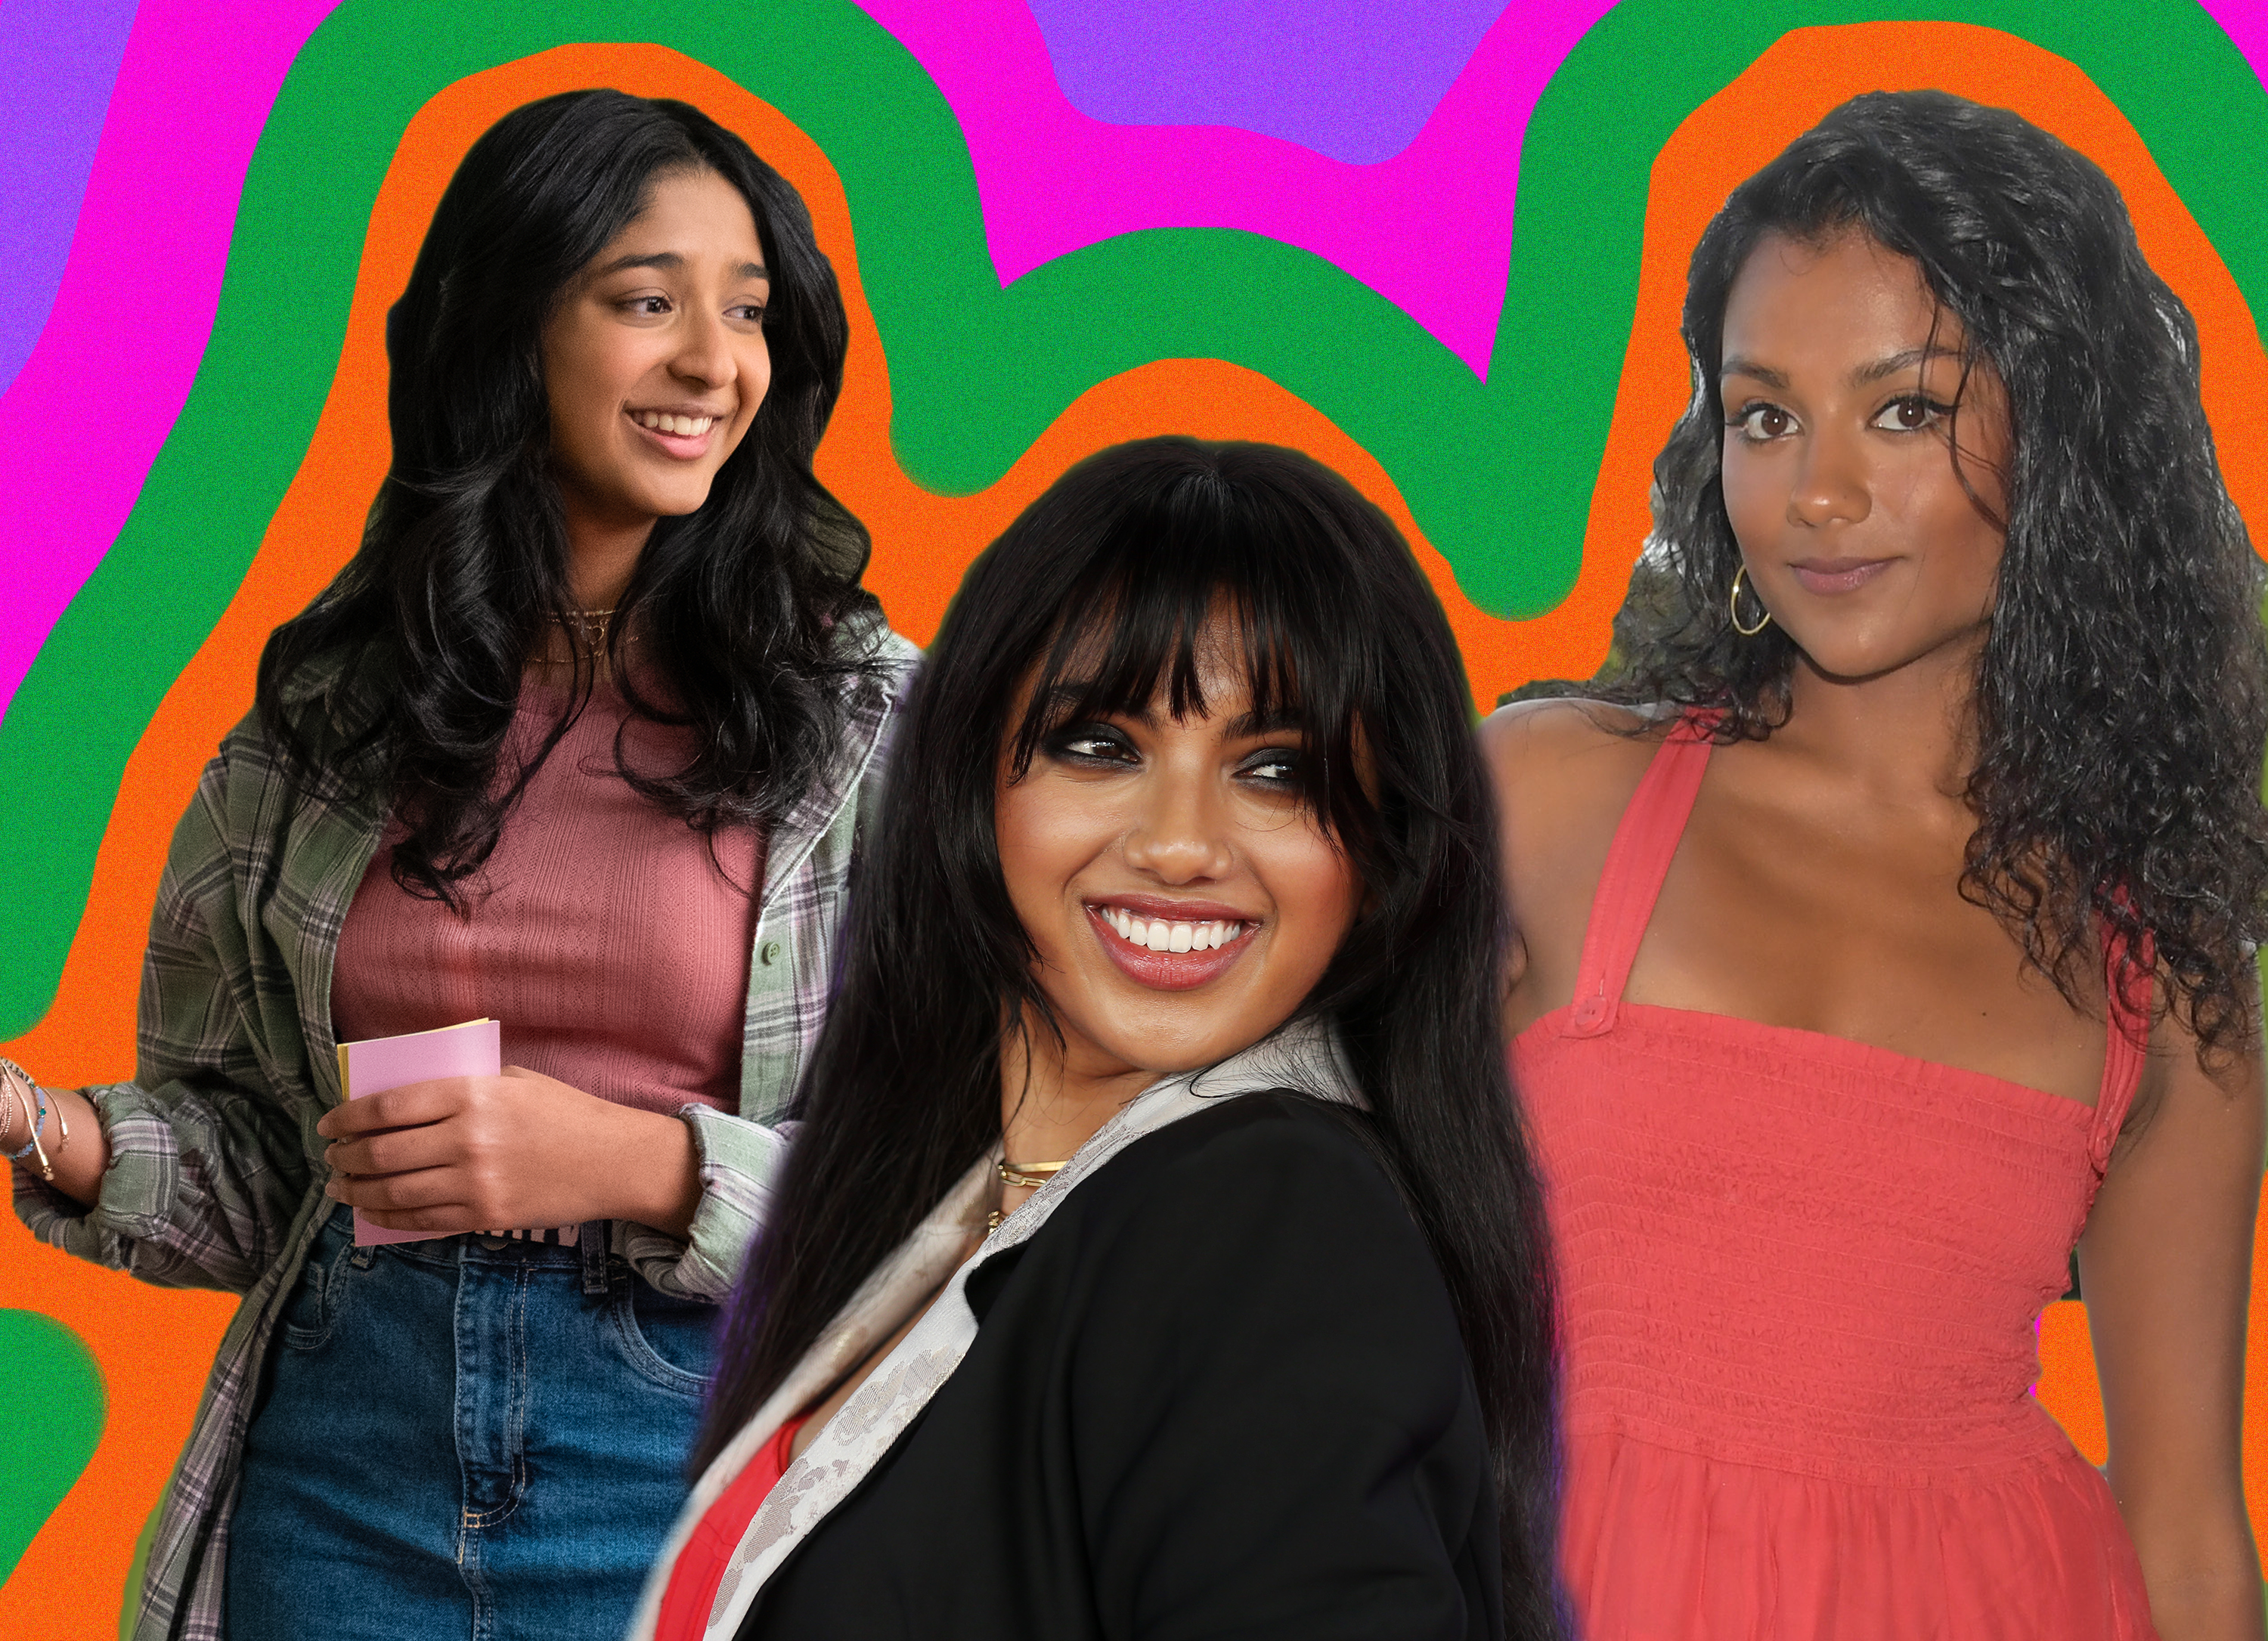 South Asian Women Are Finally Getting More Screen Time